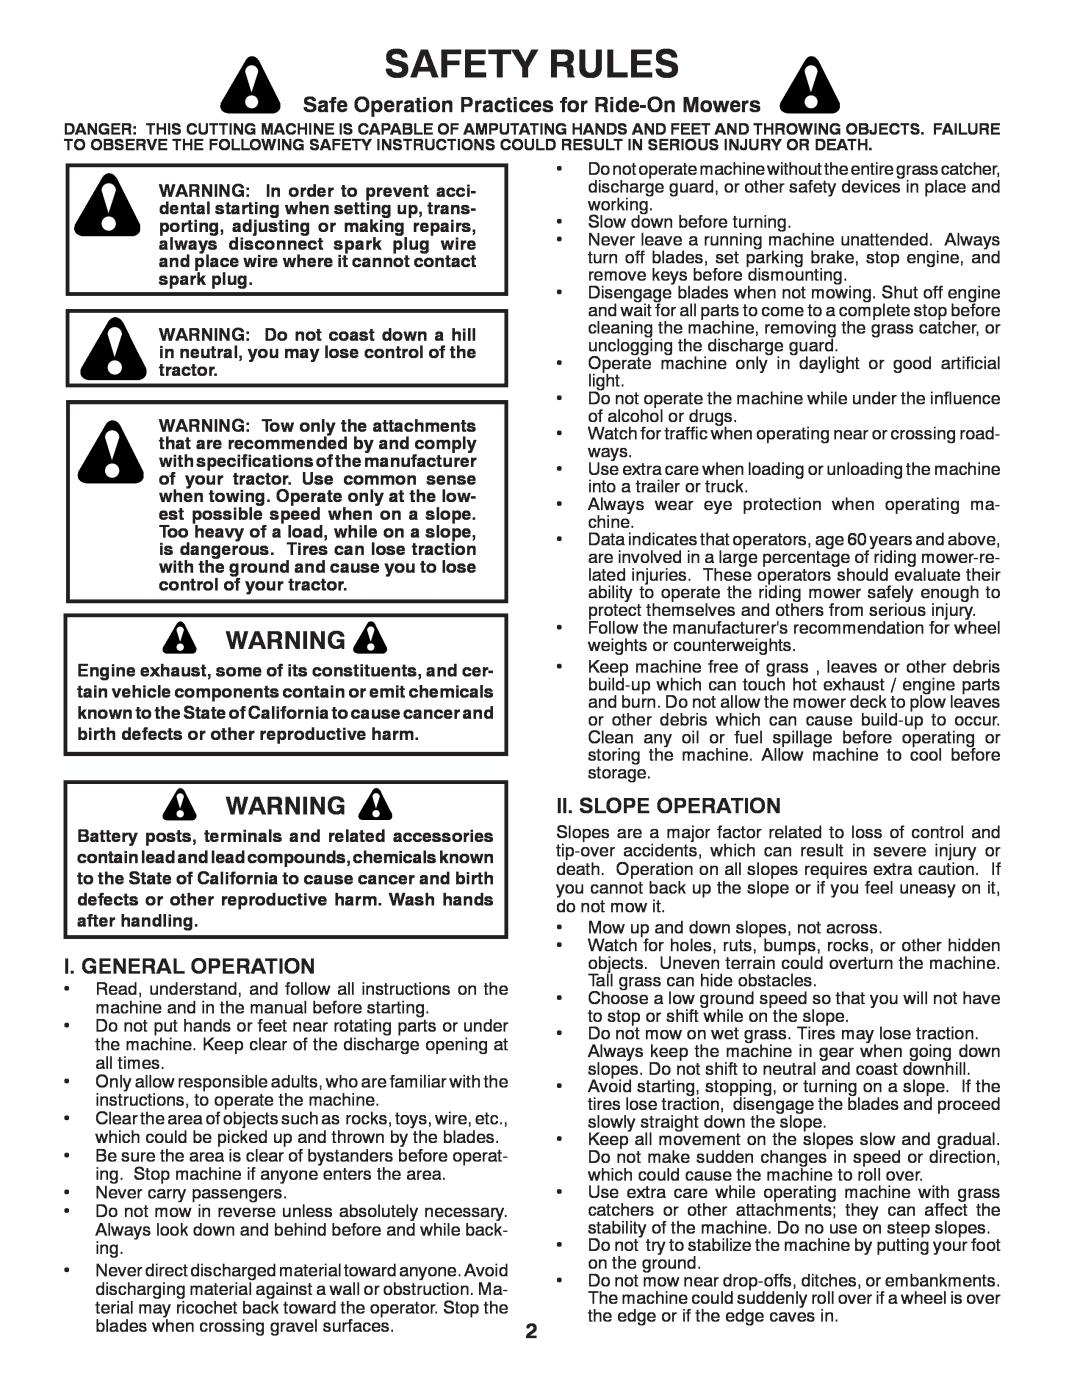 Poulan 960120068 manual Safety Rules, Safe Operation Practices for Ride-OnMowers, I. General Operation, Ii. Slope Operation 